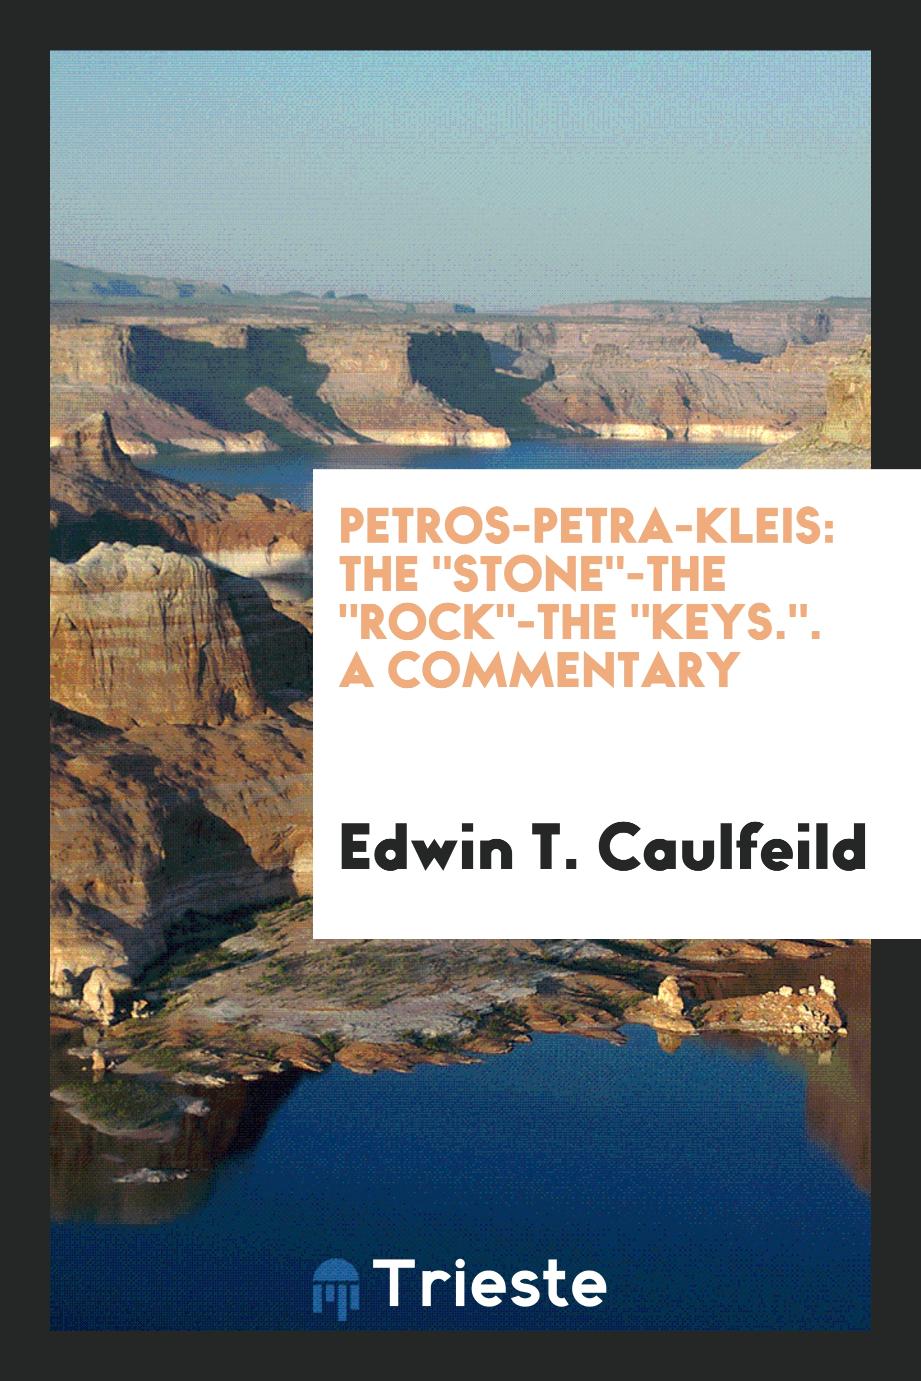 Petros-Petra-Kleis: The "Stone"-The "Rock"-The "Keys.". A Commentary